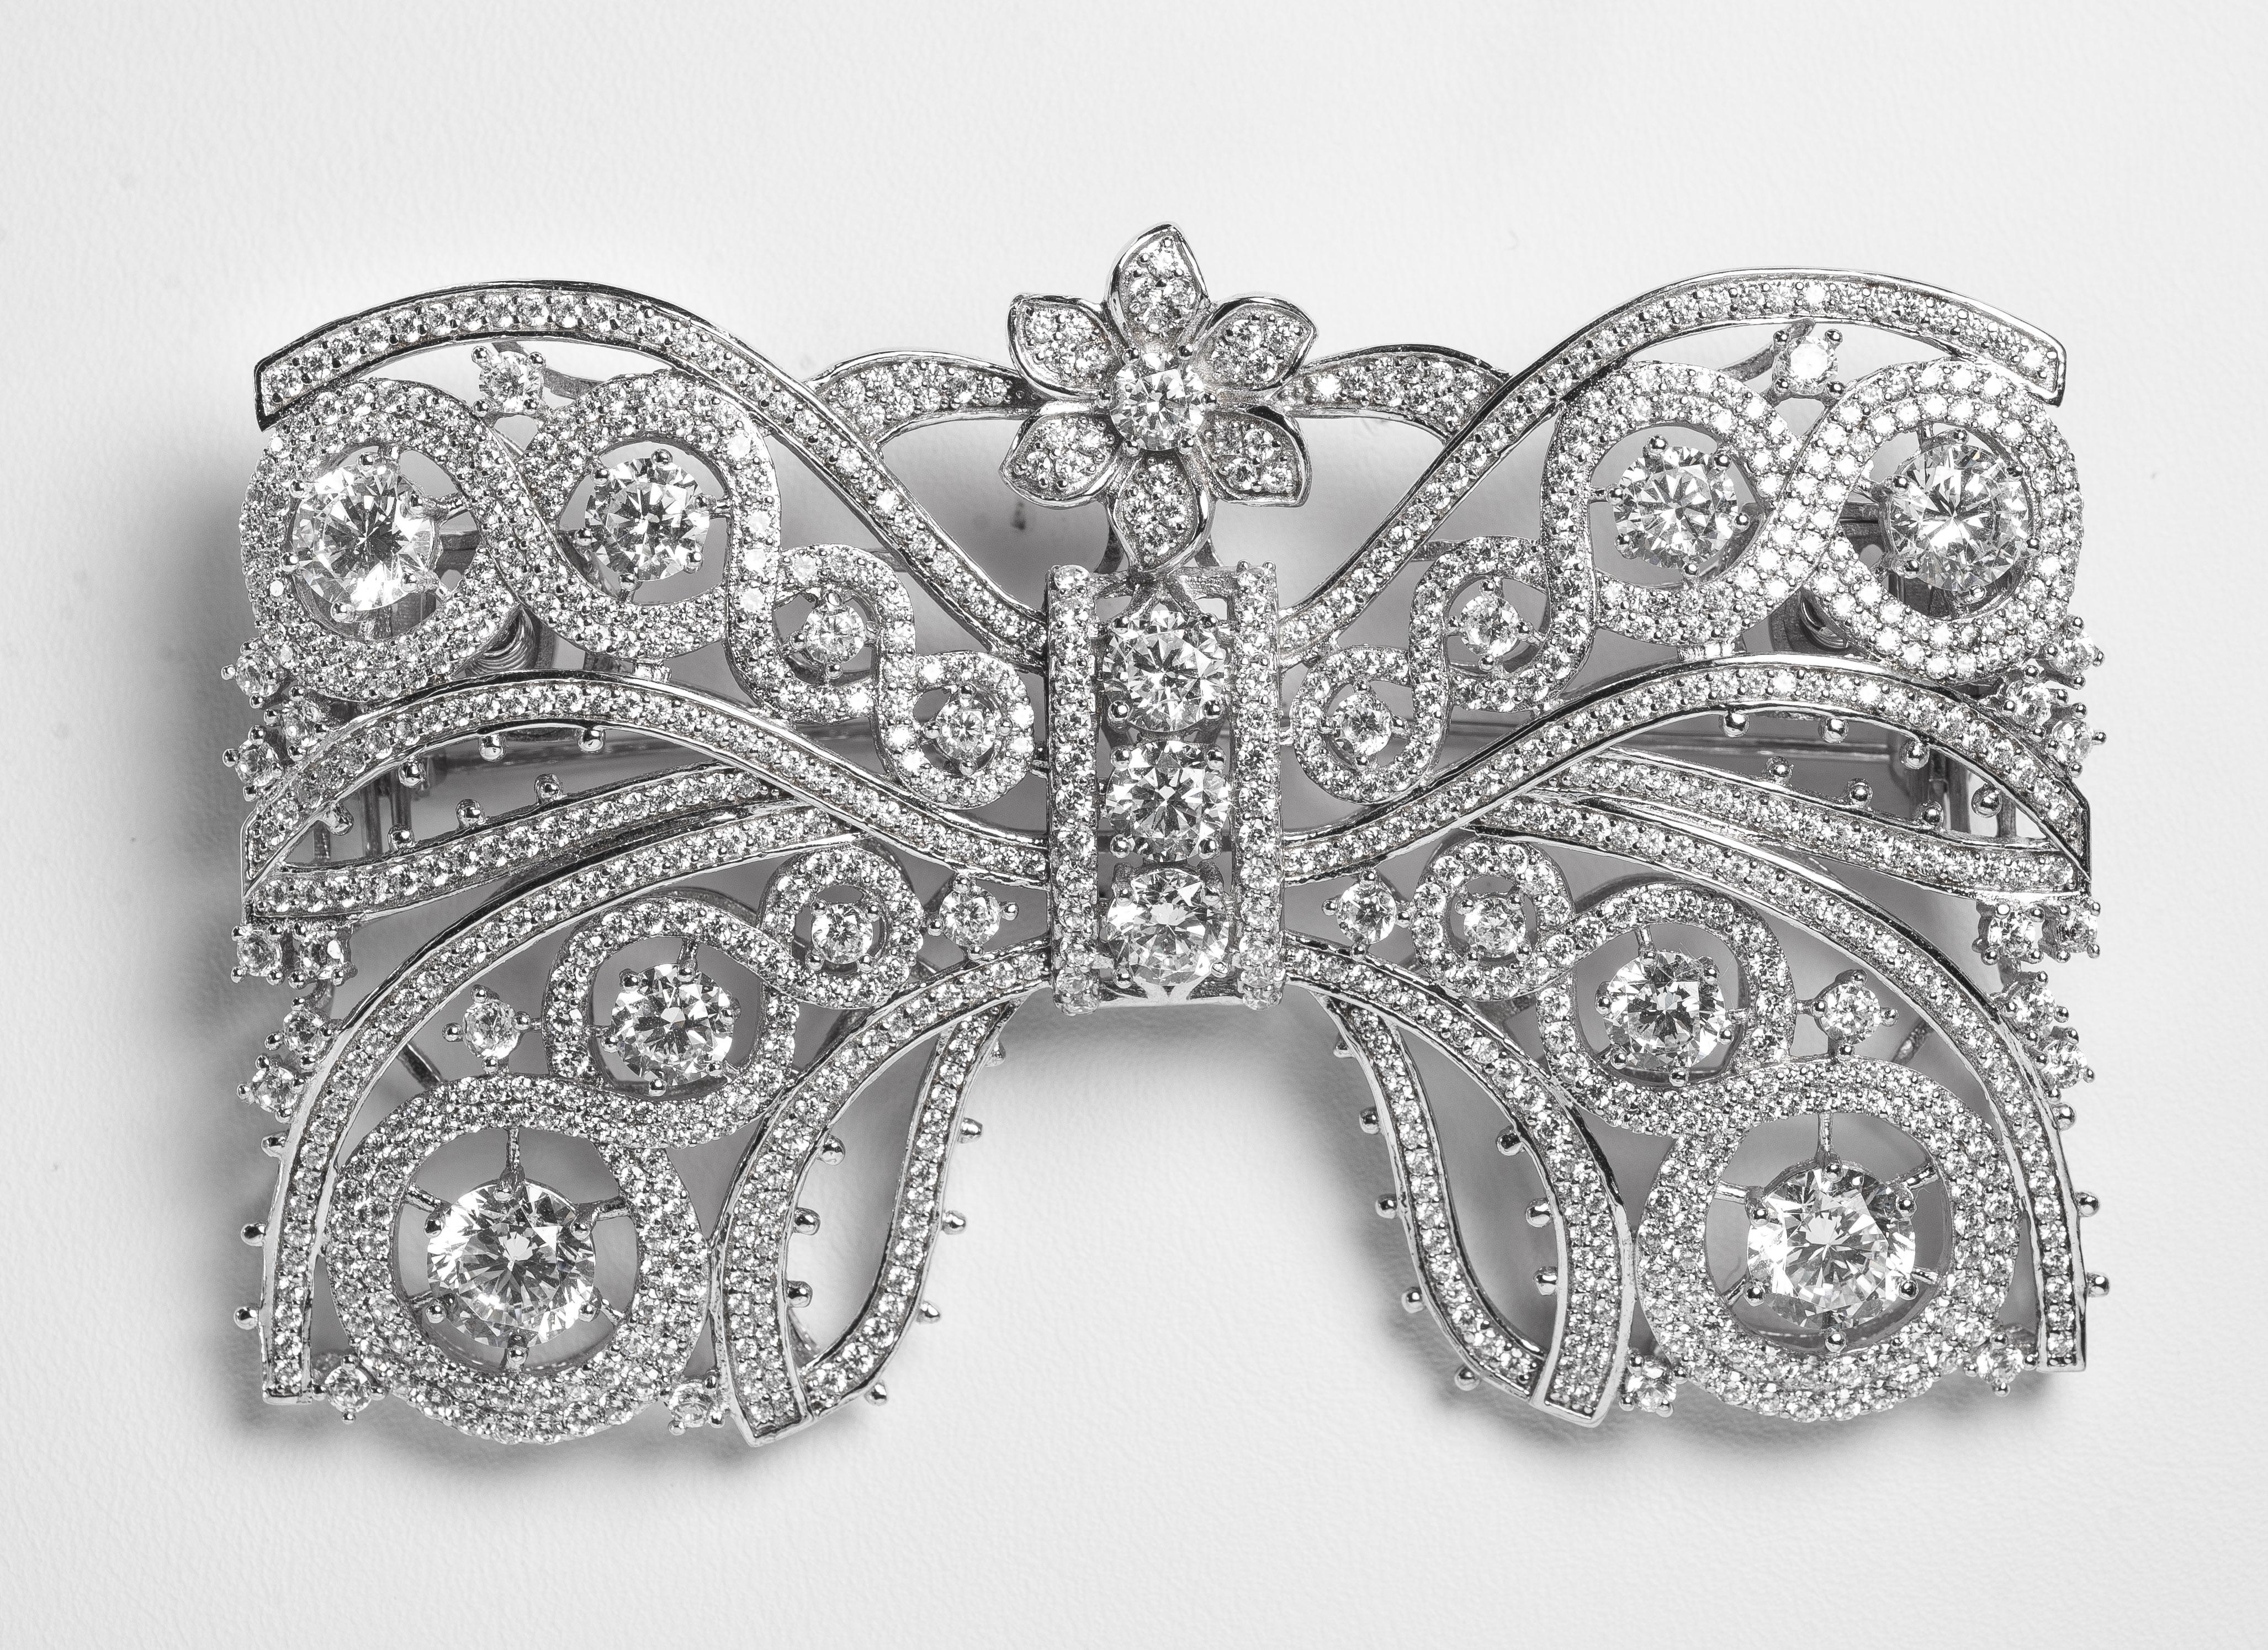 
Cartier Inspired  Garland Style Large Diamante Sterling Bow Pin
Marie Antoinette Collection garland style large faux diamond bow pin micro pave cubic zircons set in rhodium sterling makes this large 3'' wide by 2'' deep very much a statement jewel.